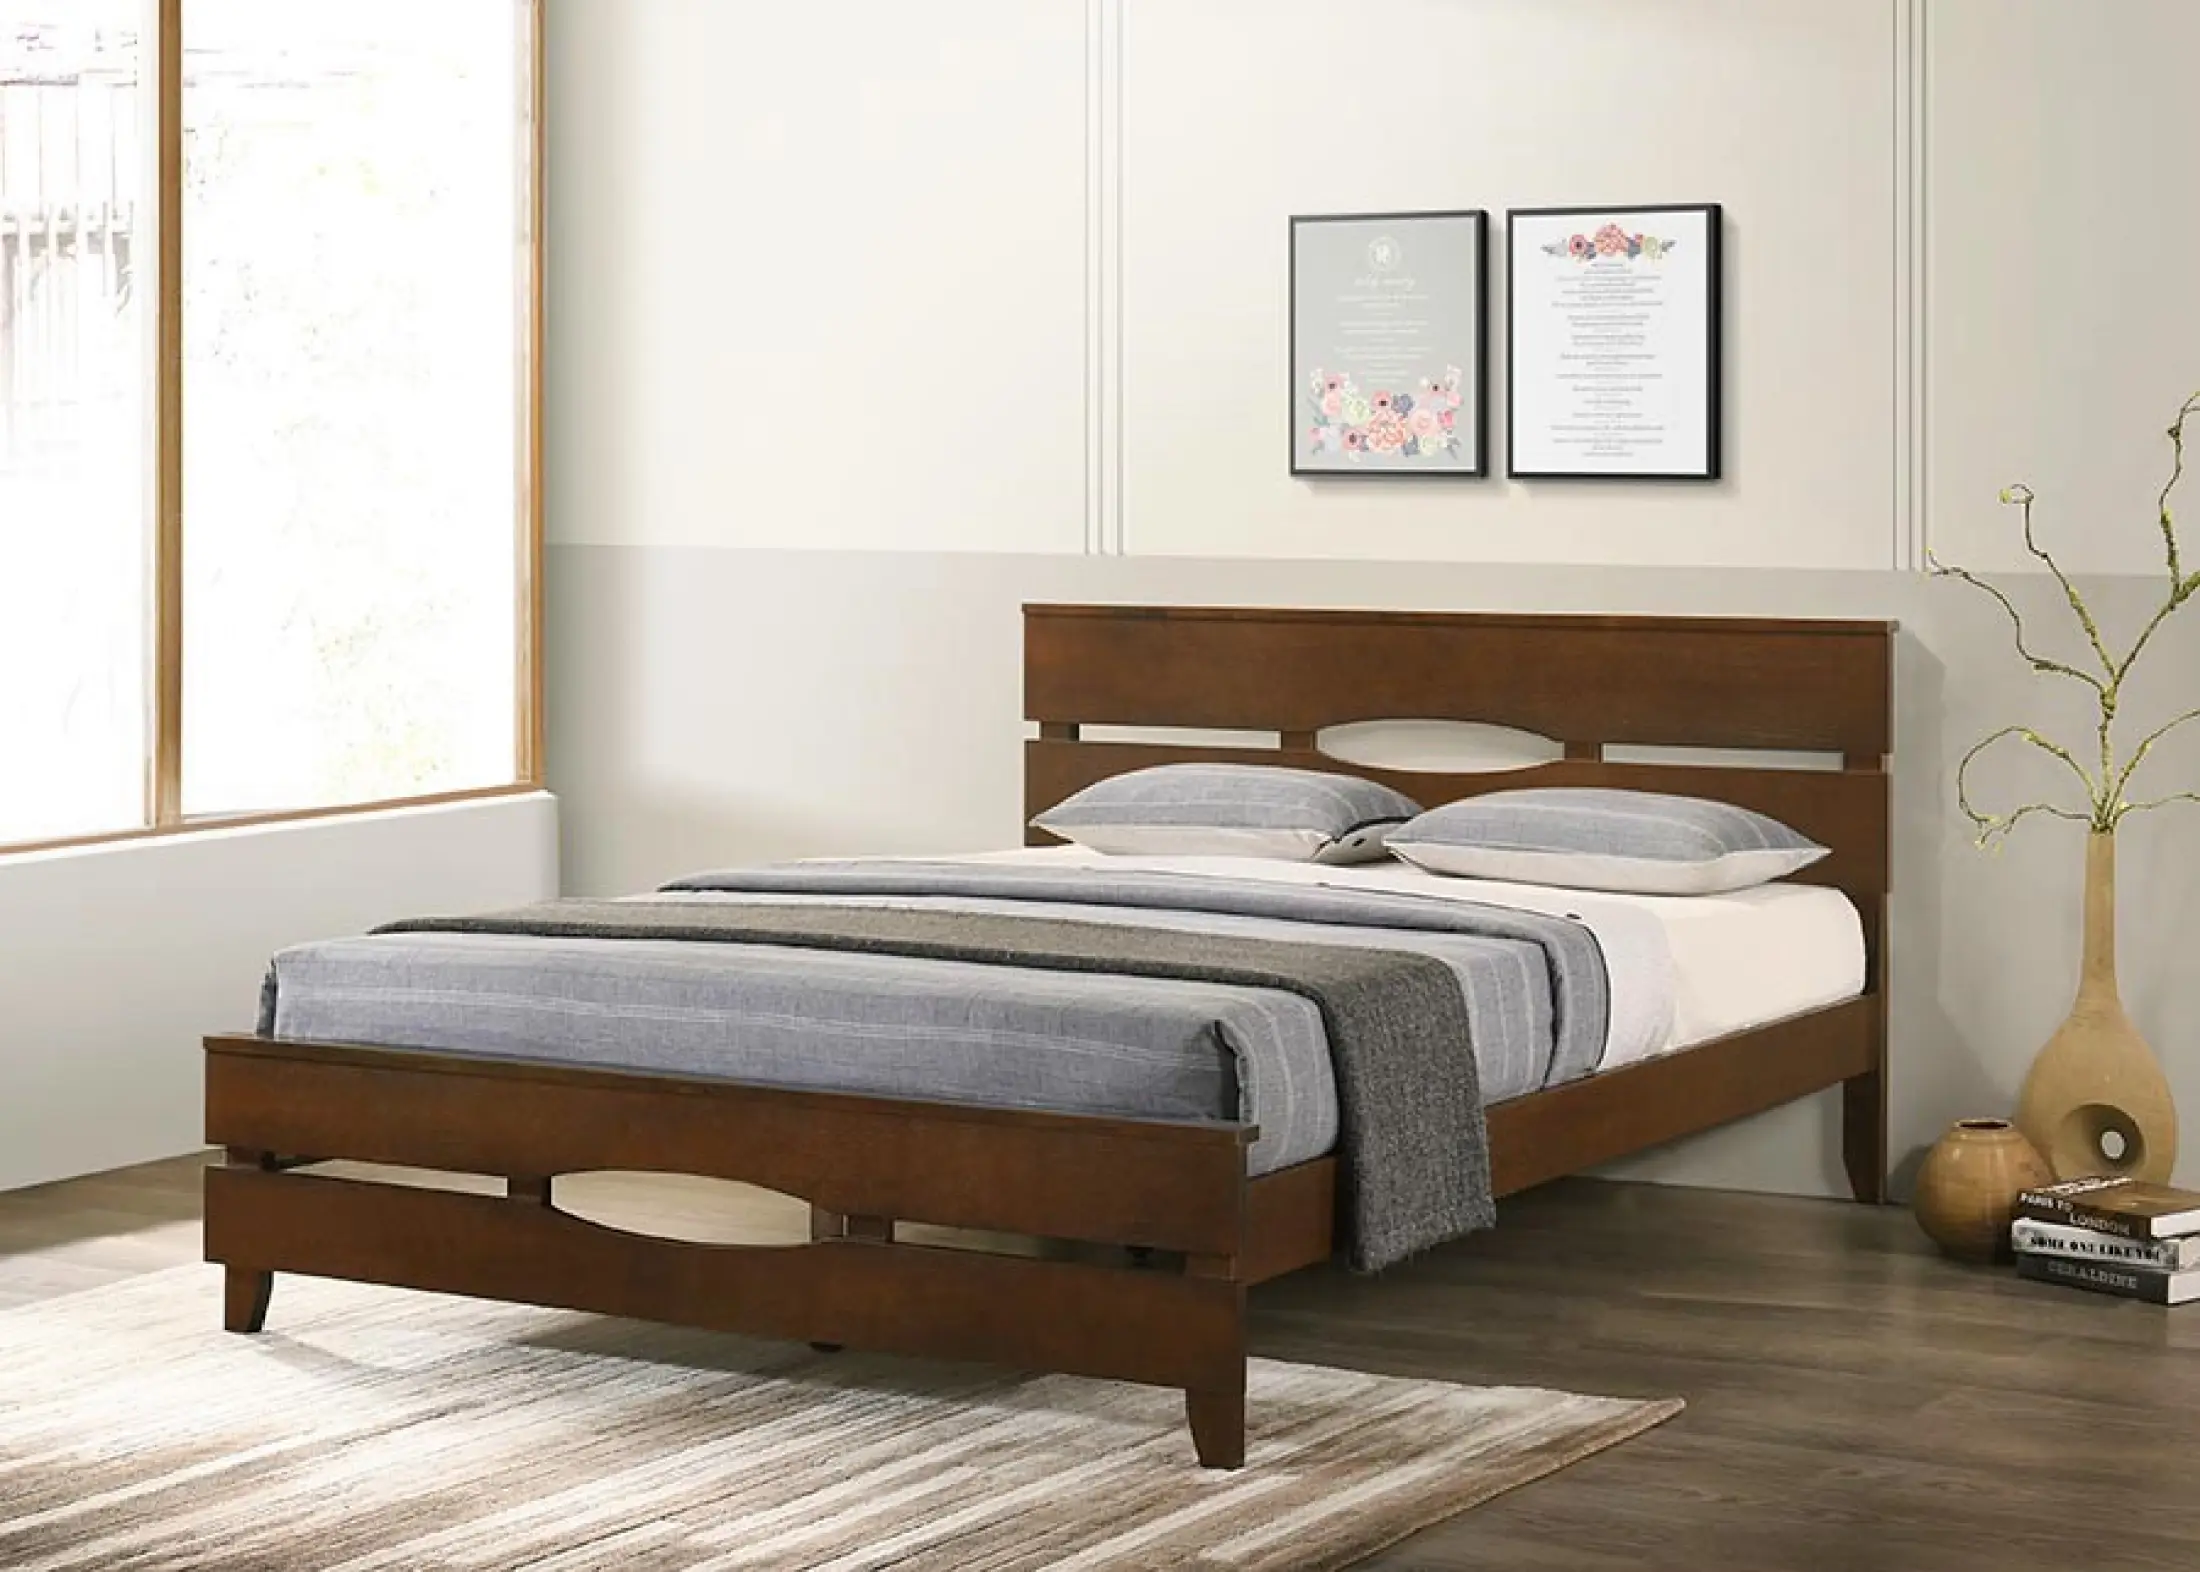 Malaysian Bed Frame Lazada Ph, Bed Frame Nearby